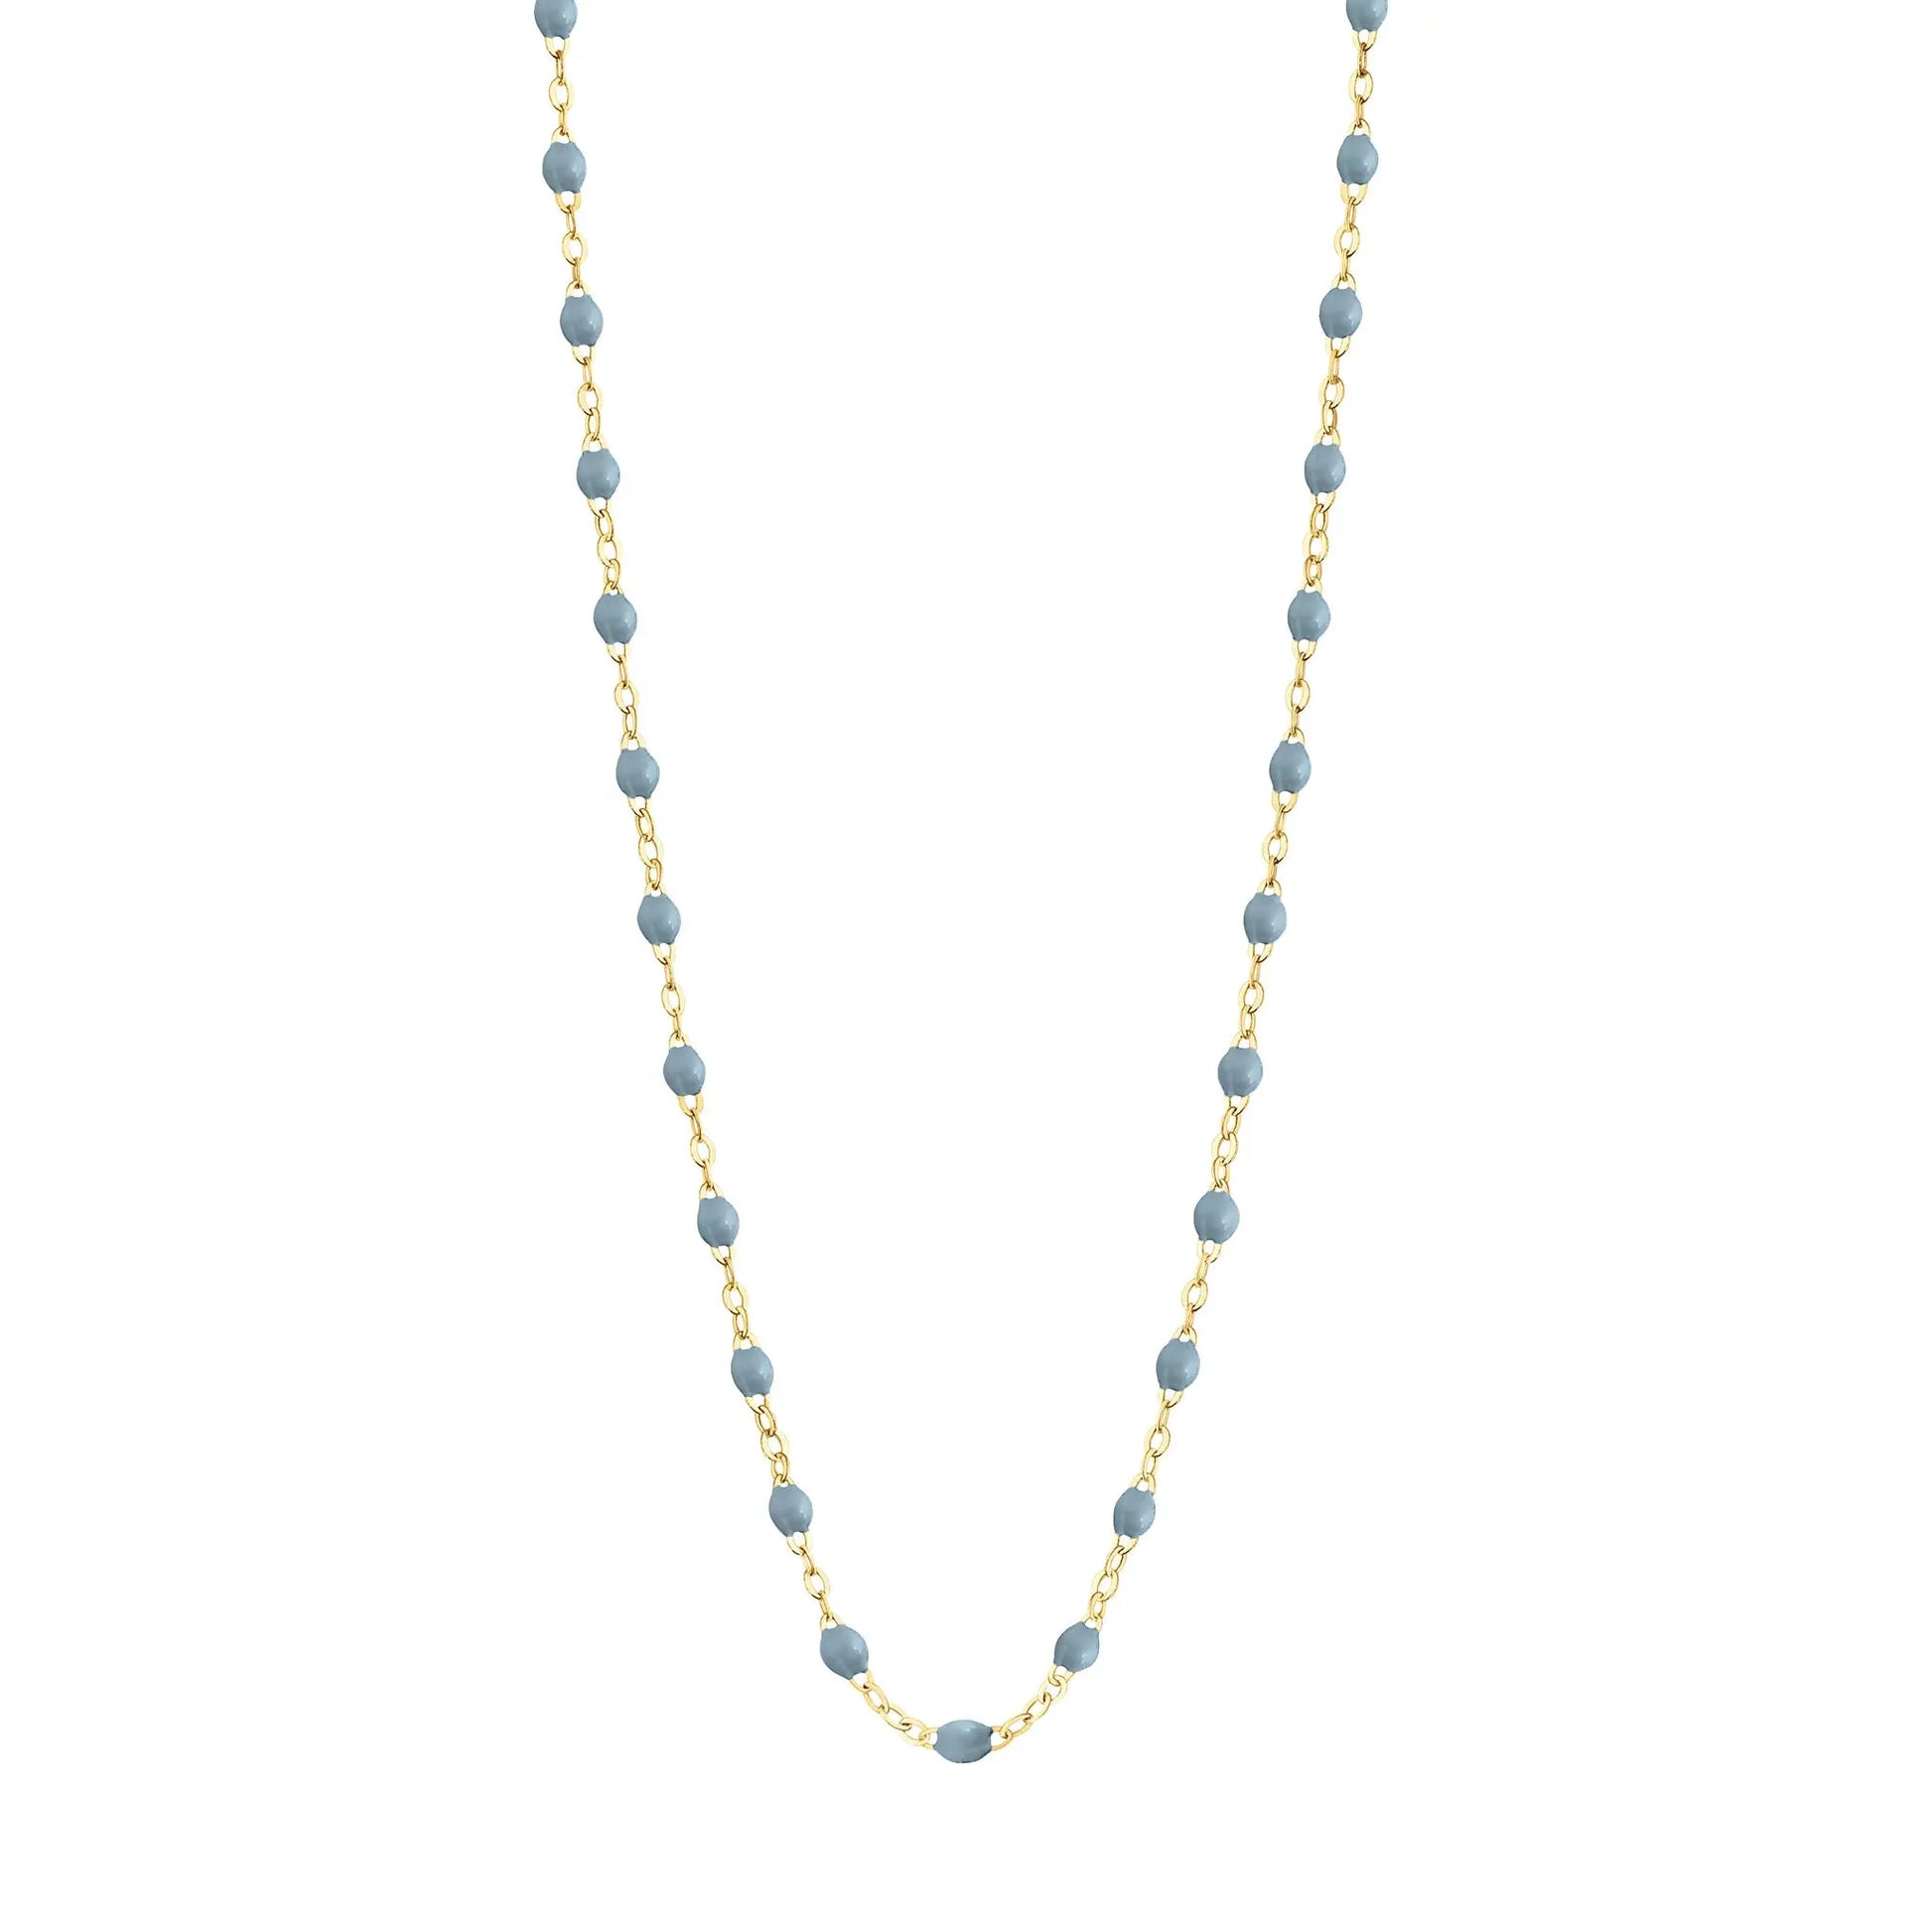 Stack you necklace layers with this versatile beaded chain! The Classic Gigi Necklace by gigi CLOZEAU features 18 carat yellow gold, and striking Jeans resin jewels for an everyday effortless appearance. Handcrafted in 18k yellow gold. The beads measure 1.50mm in diameter and is finished with a spring ring clasp. The length is 16.5 inches.